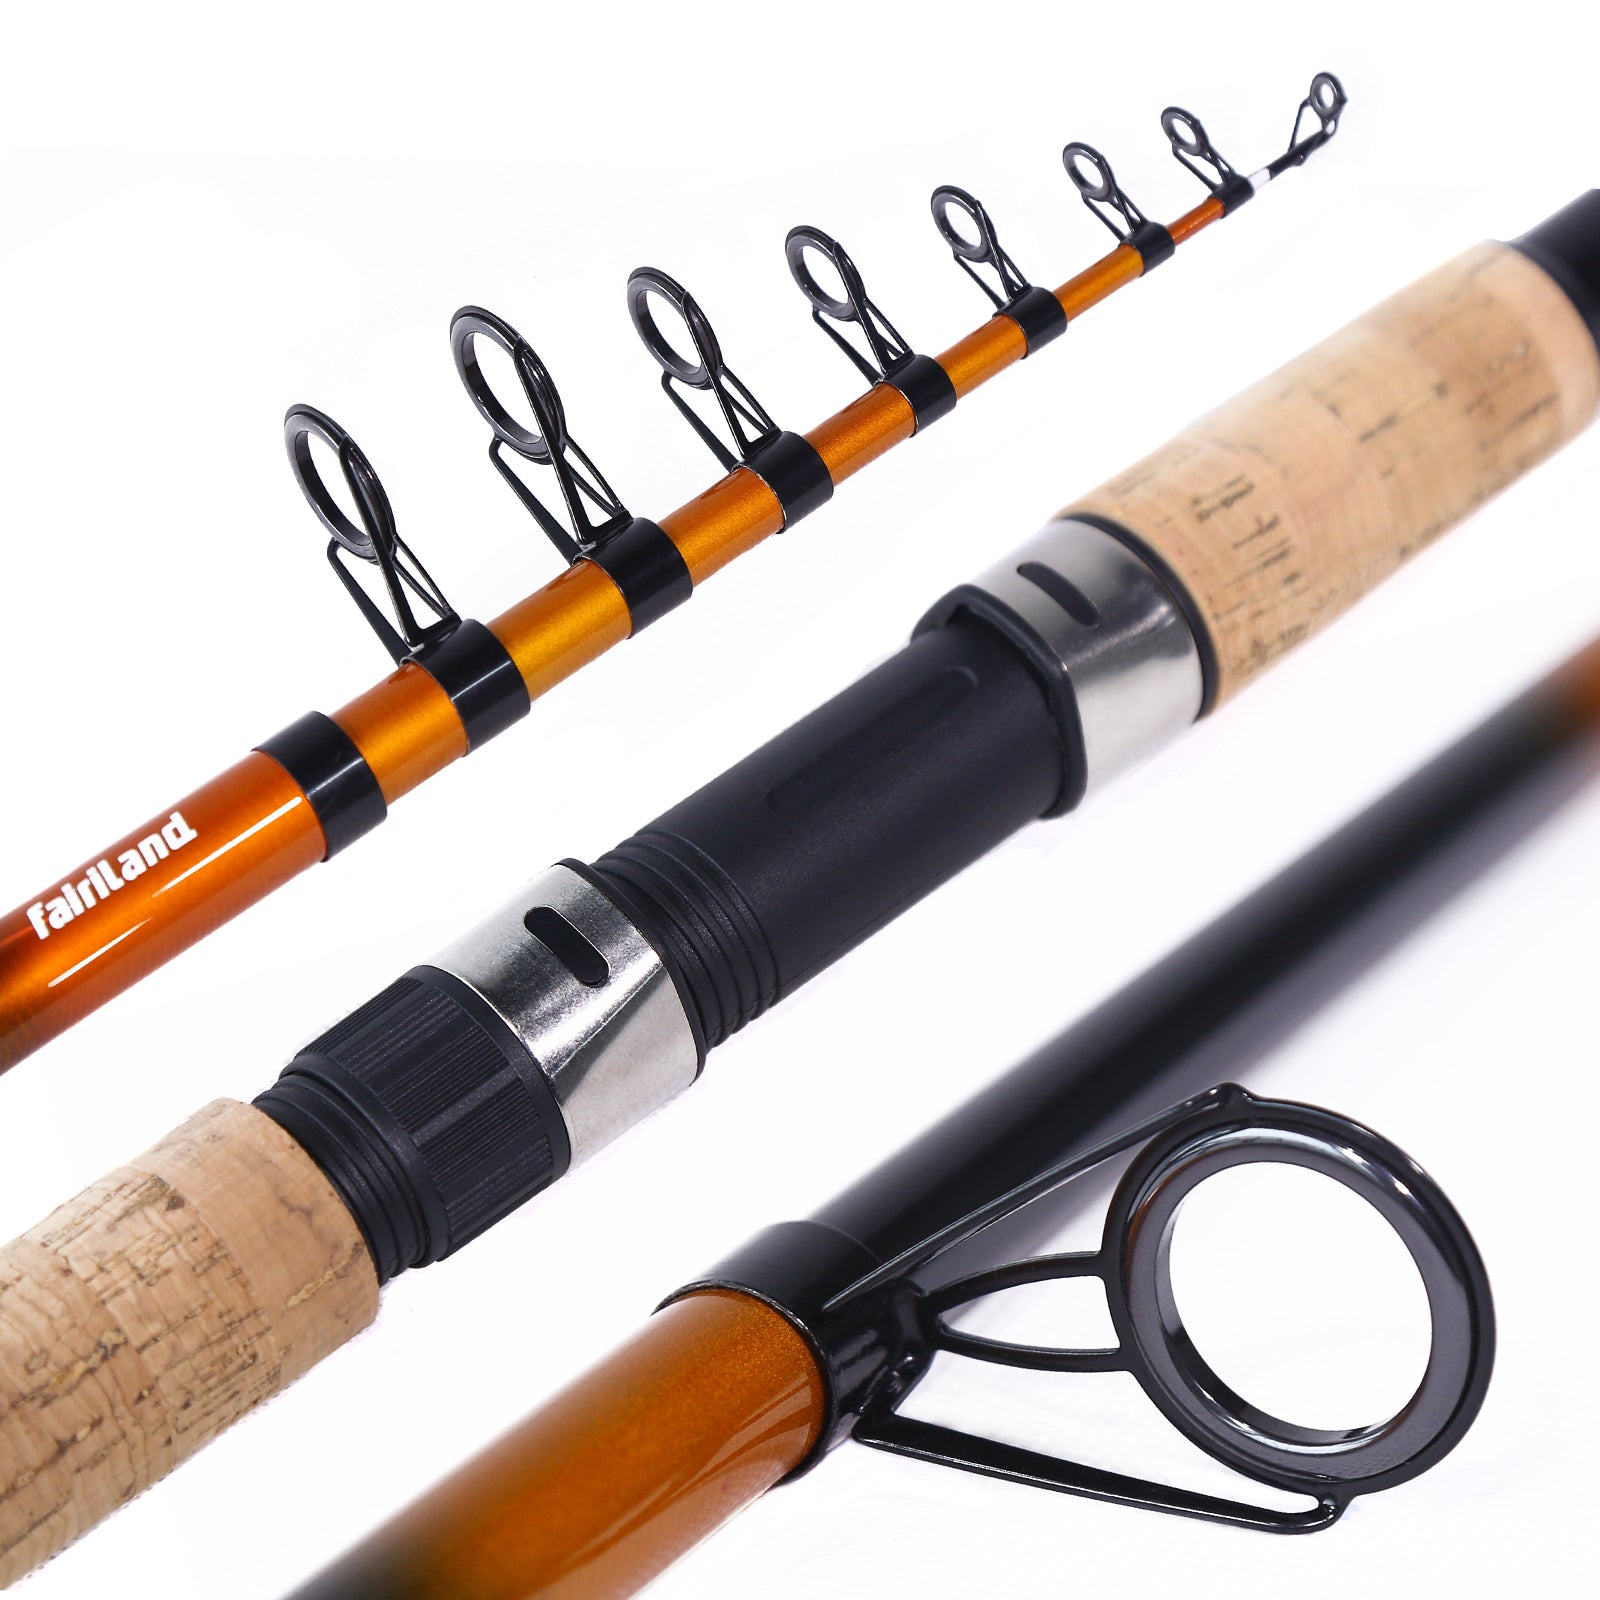 UFFD Fishing Rod Telescopic Fishing Pole Kit for Men Collapsible